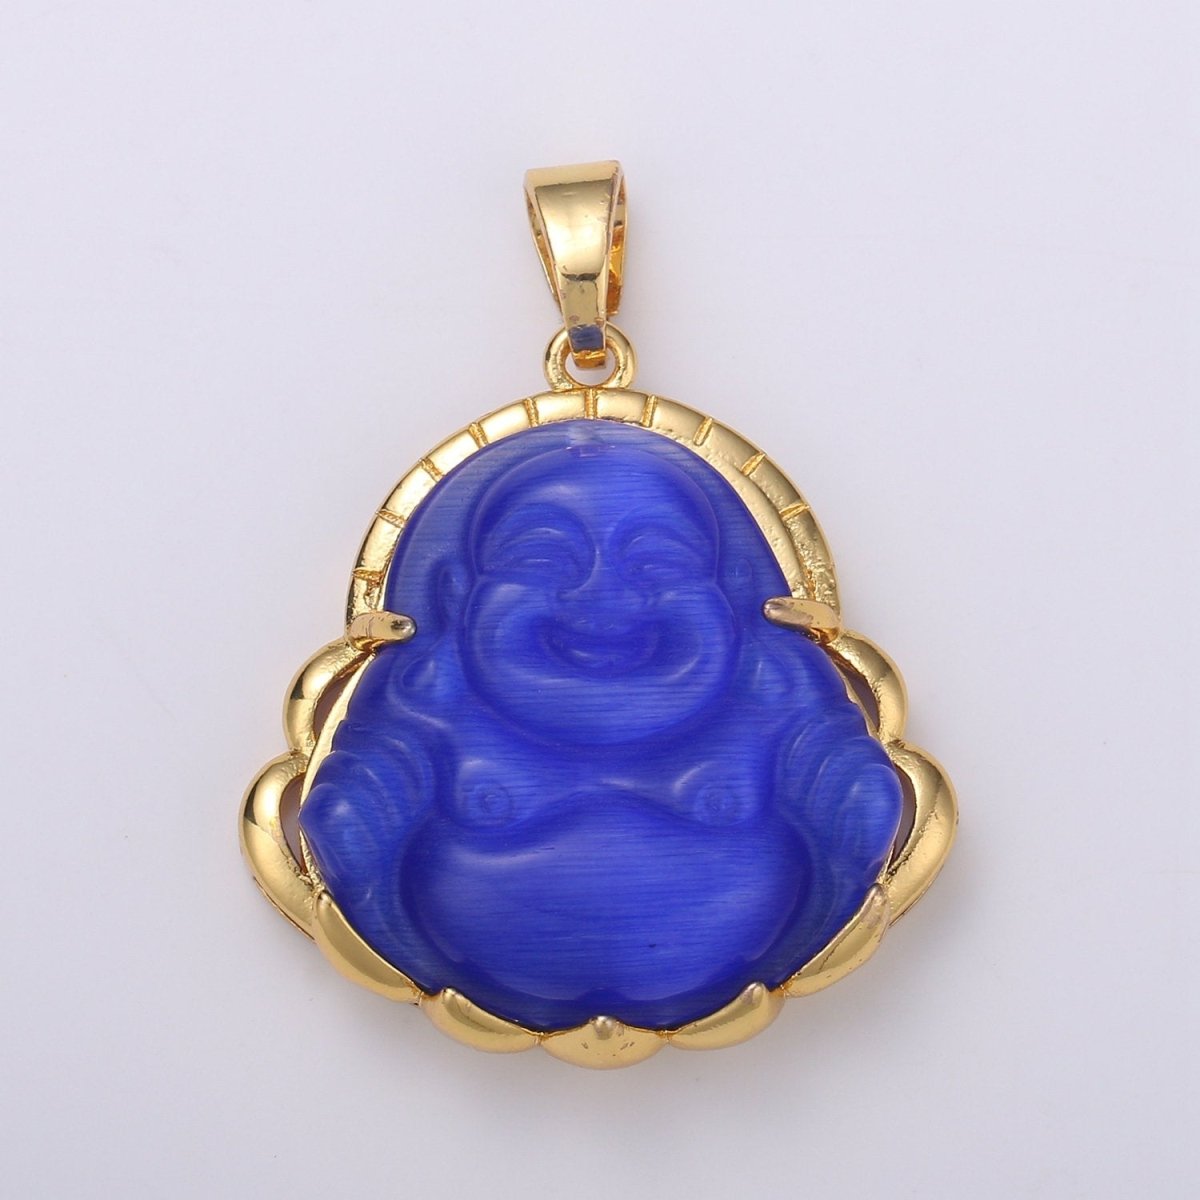 Small 24k Gold Filled Buddha Pendant for Necklace Laughing Buddha Charm Blue Clear Green Buddha Pendant - DLUXCA